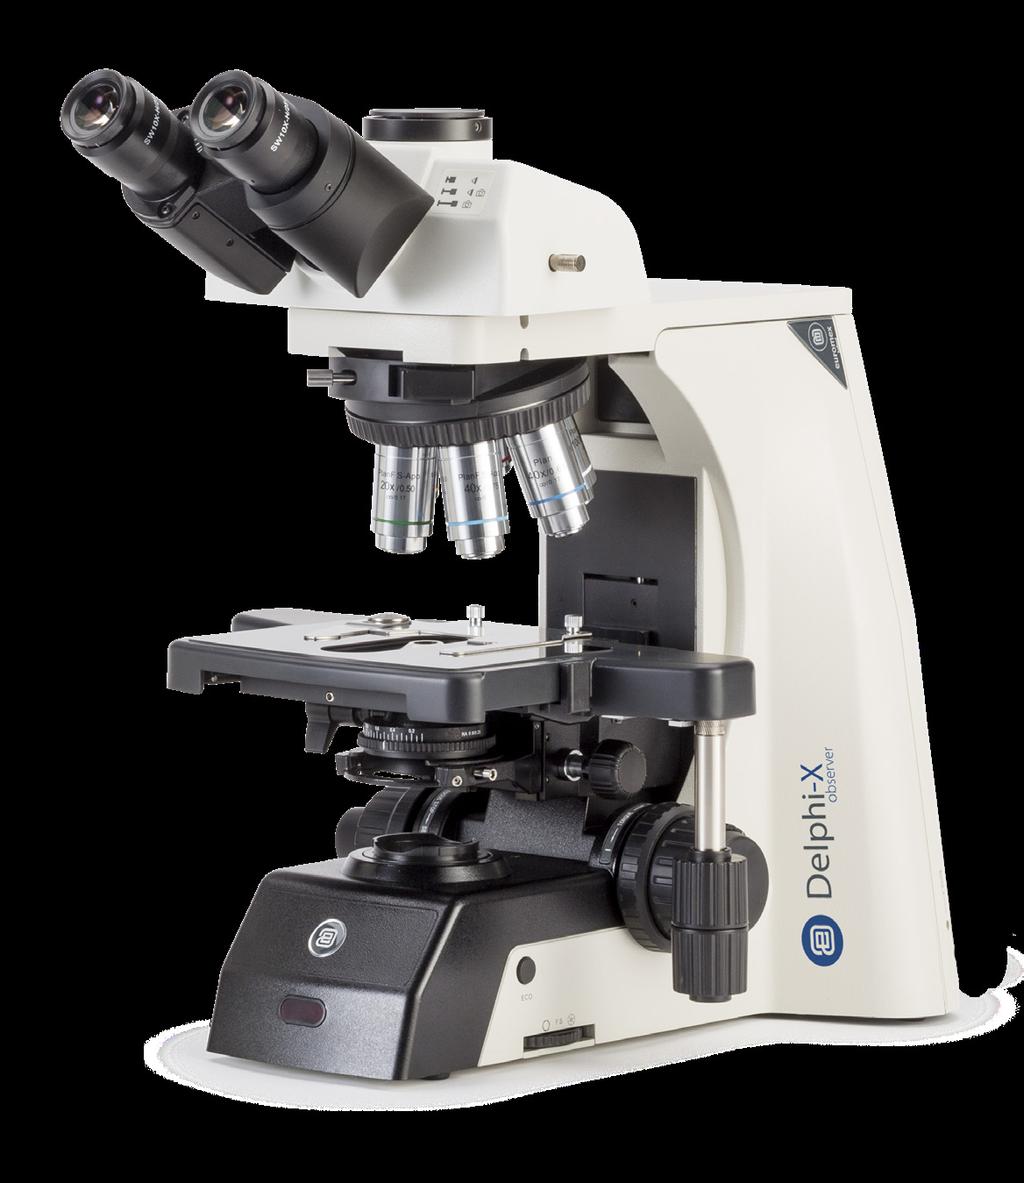 Diopter ± 5 adjustments on both Ergonomic tilting head FACE-TO-FACE DUAL HEAD SYSTEM The Delphi-X Observer can be supplied with two binocular heads in a faceto-face configuration allowing